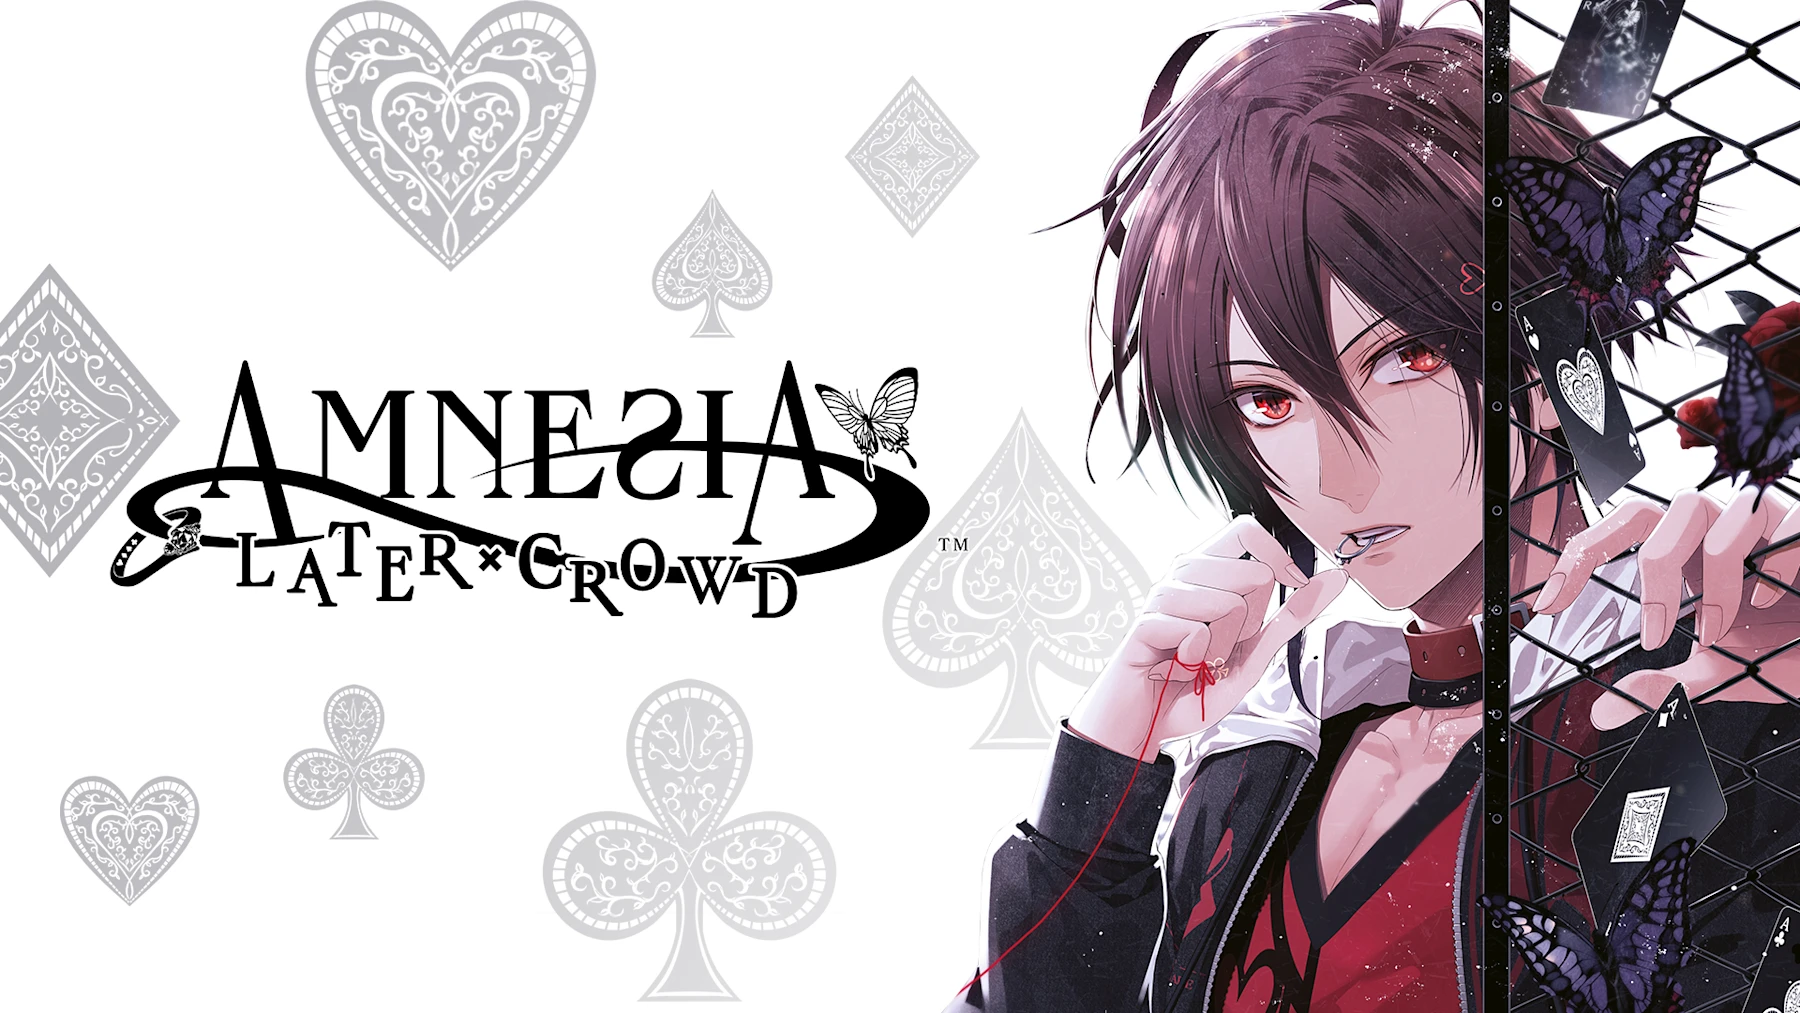 amnesia-later-crowd-fandisc-switch-review-3.png